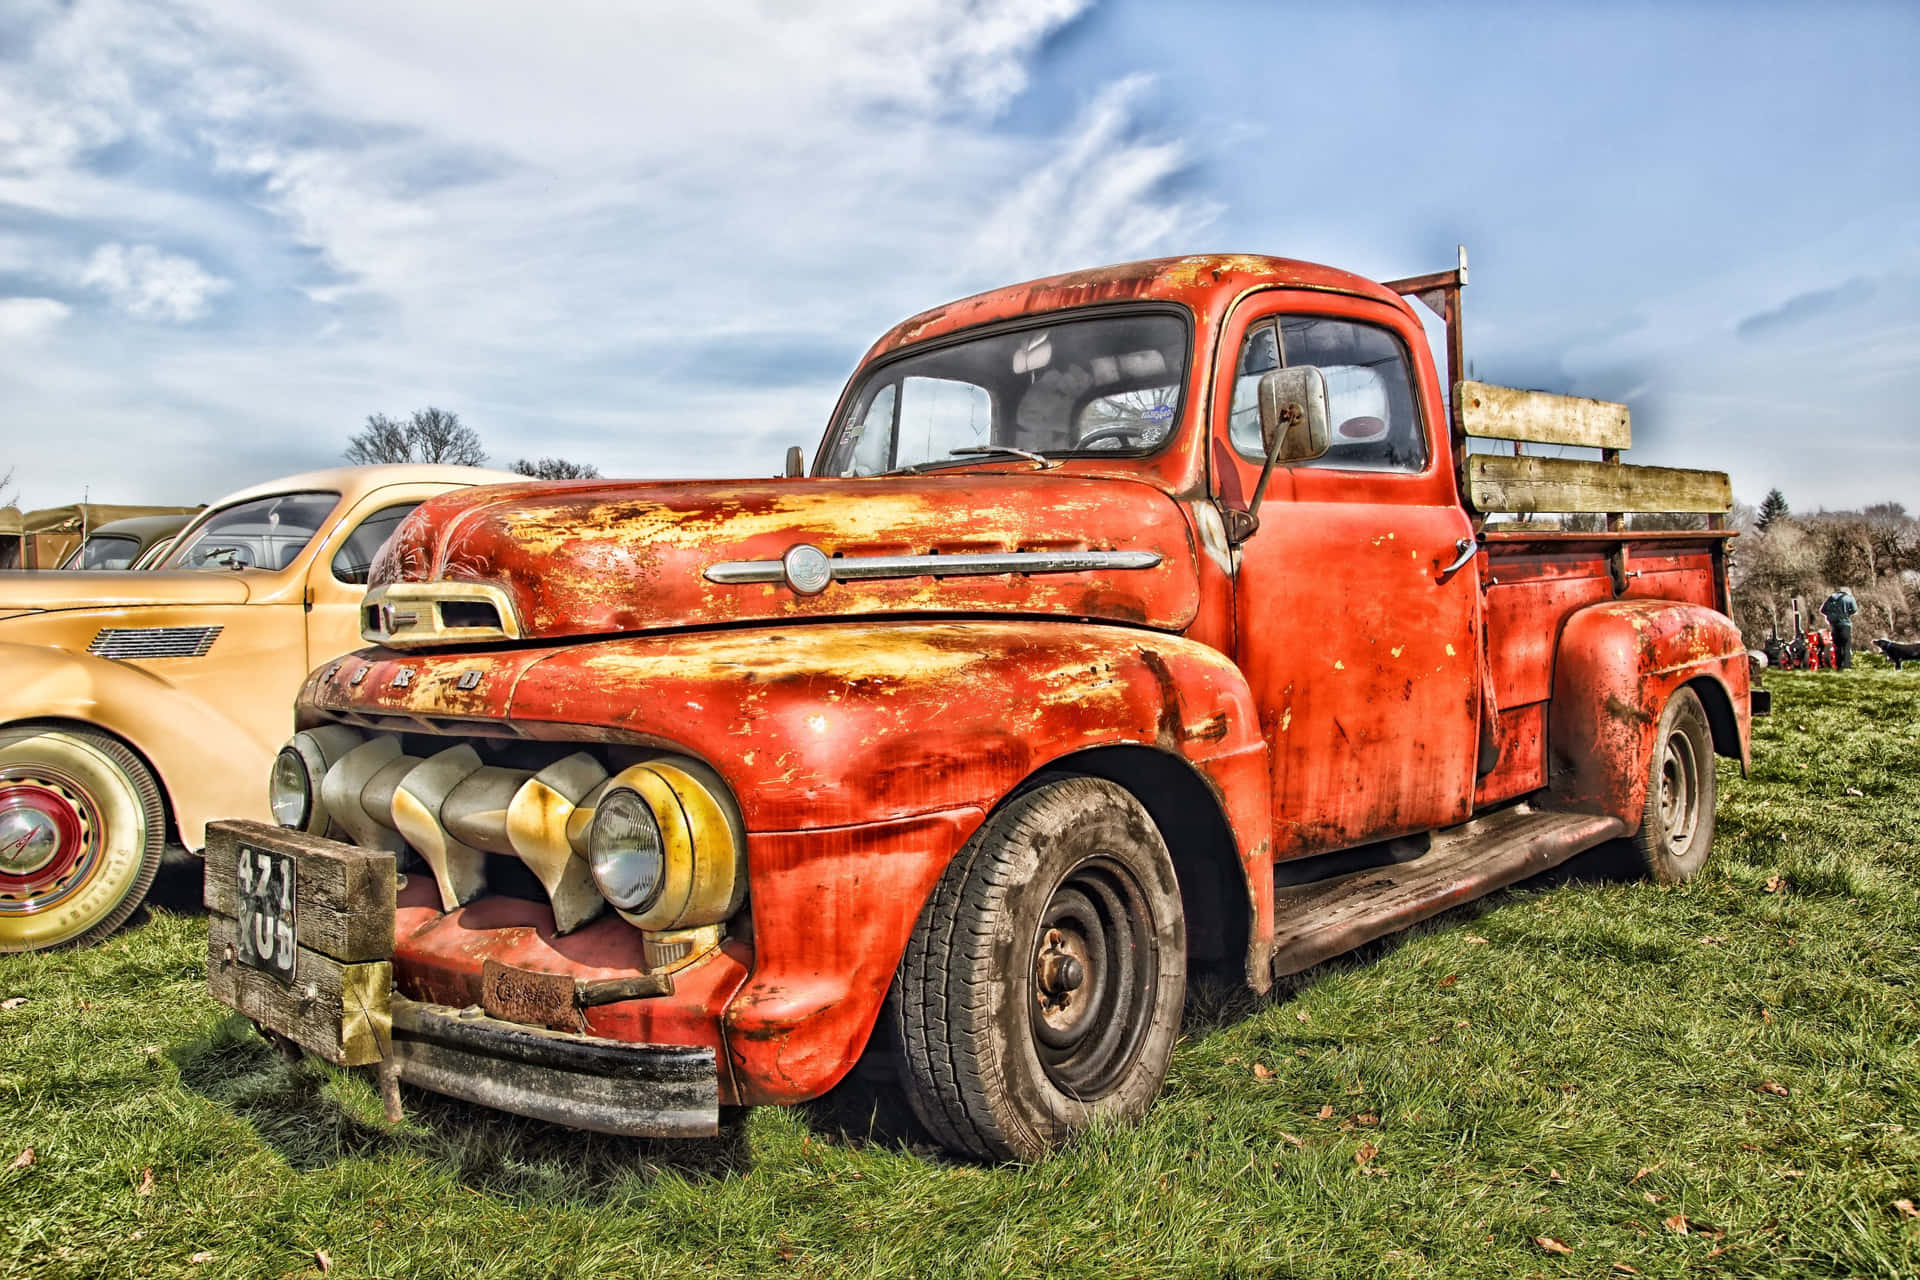 A Red Truck Parked In The Grass